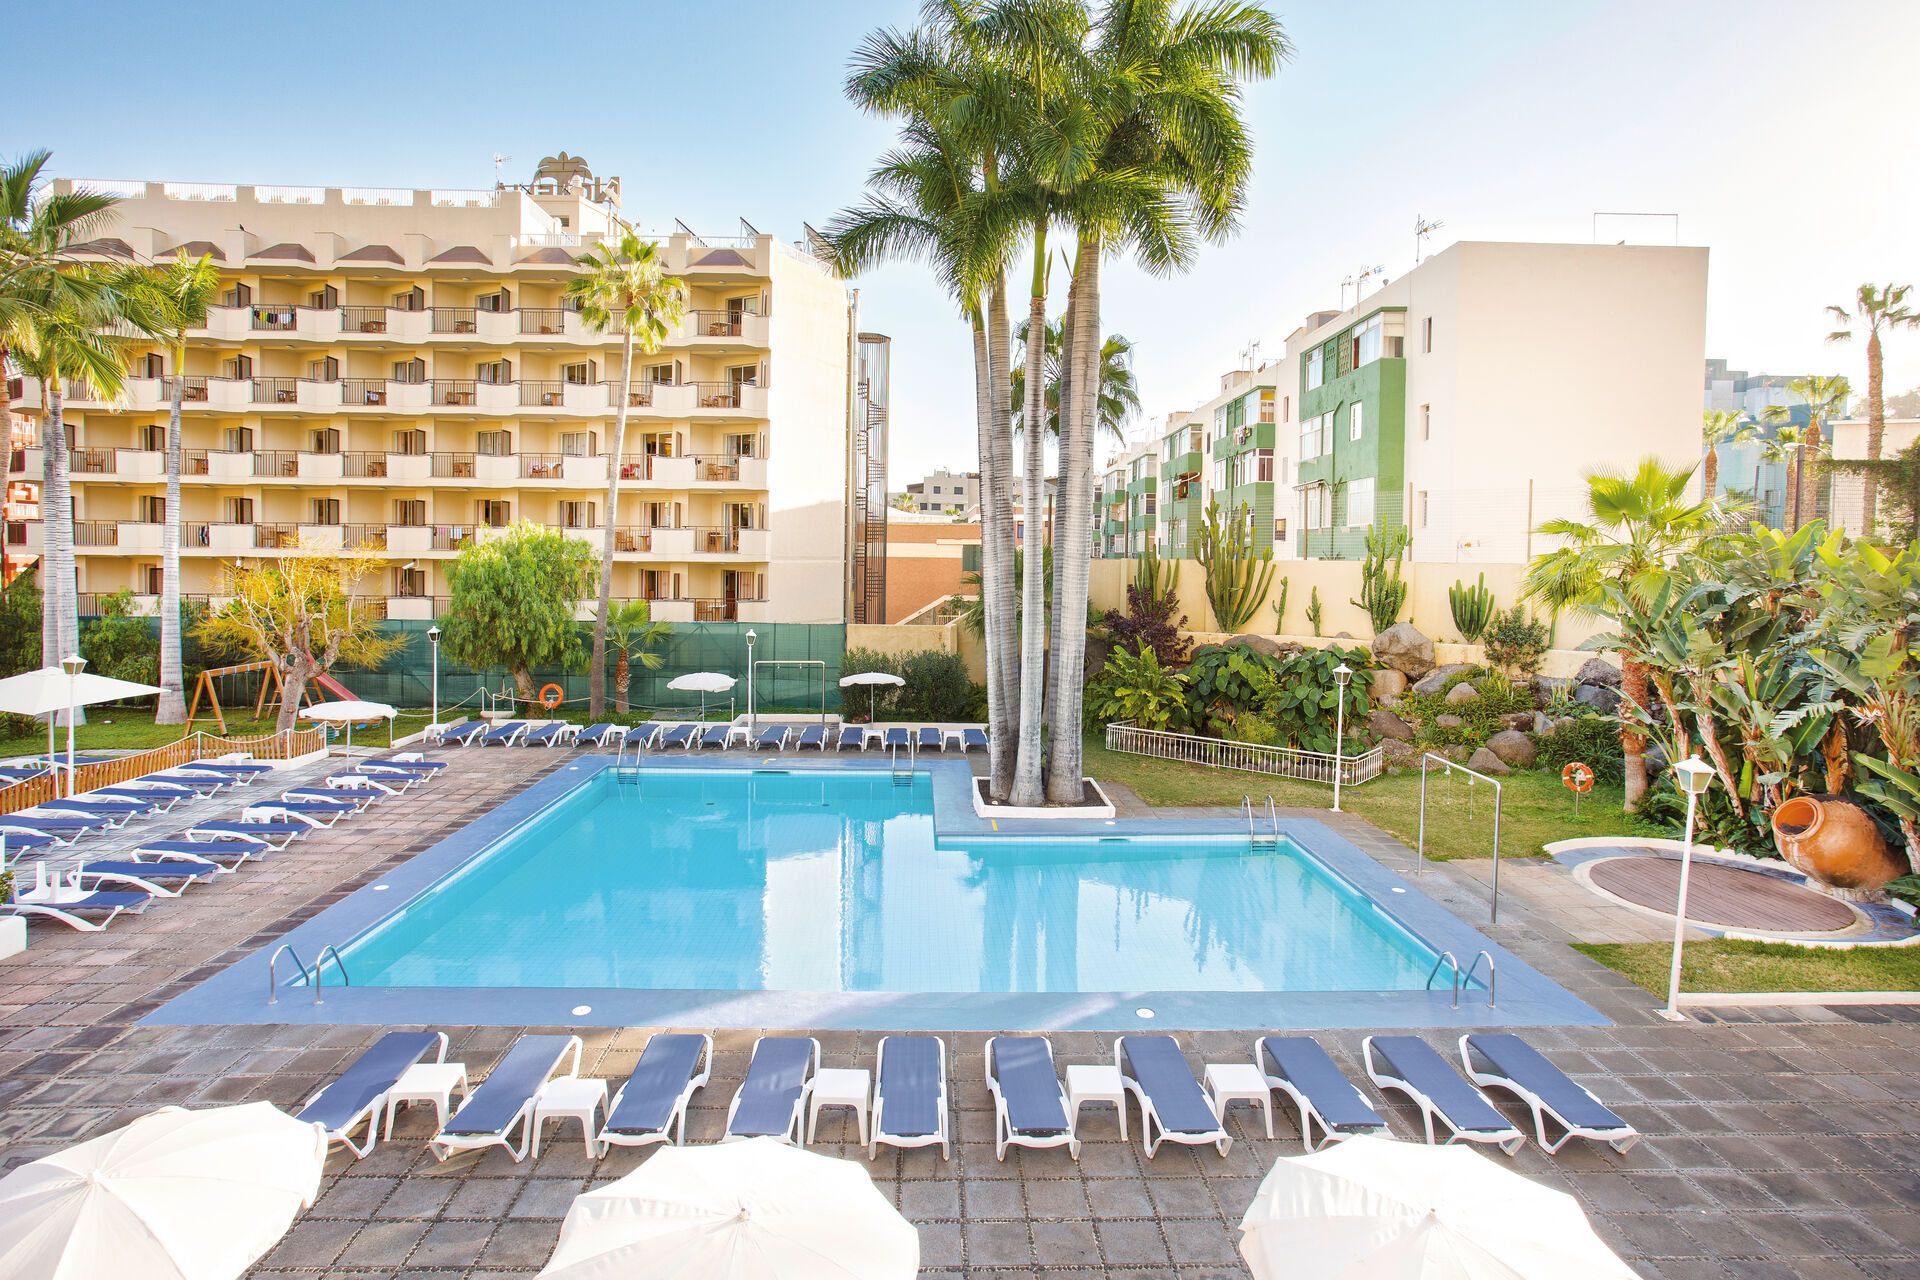 Canaries - Tenerife - Espagne - Hôtel Be Live Adults Only Tenerife 4*